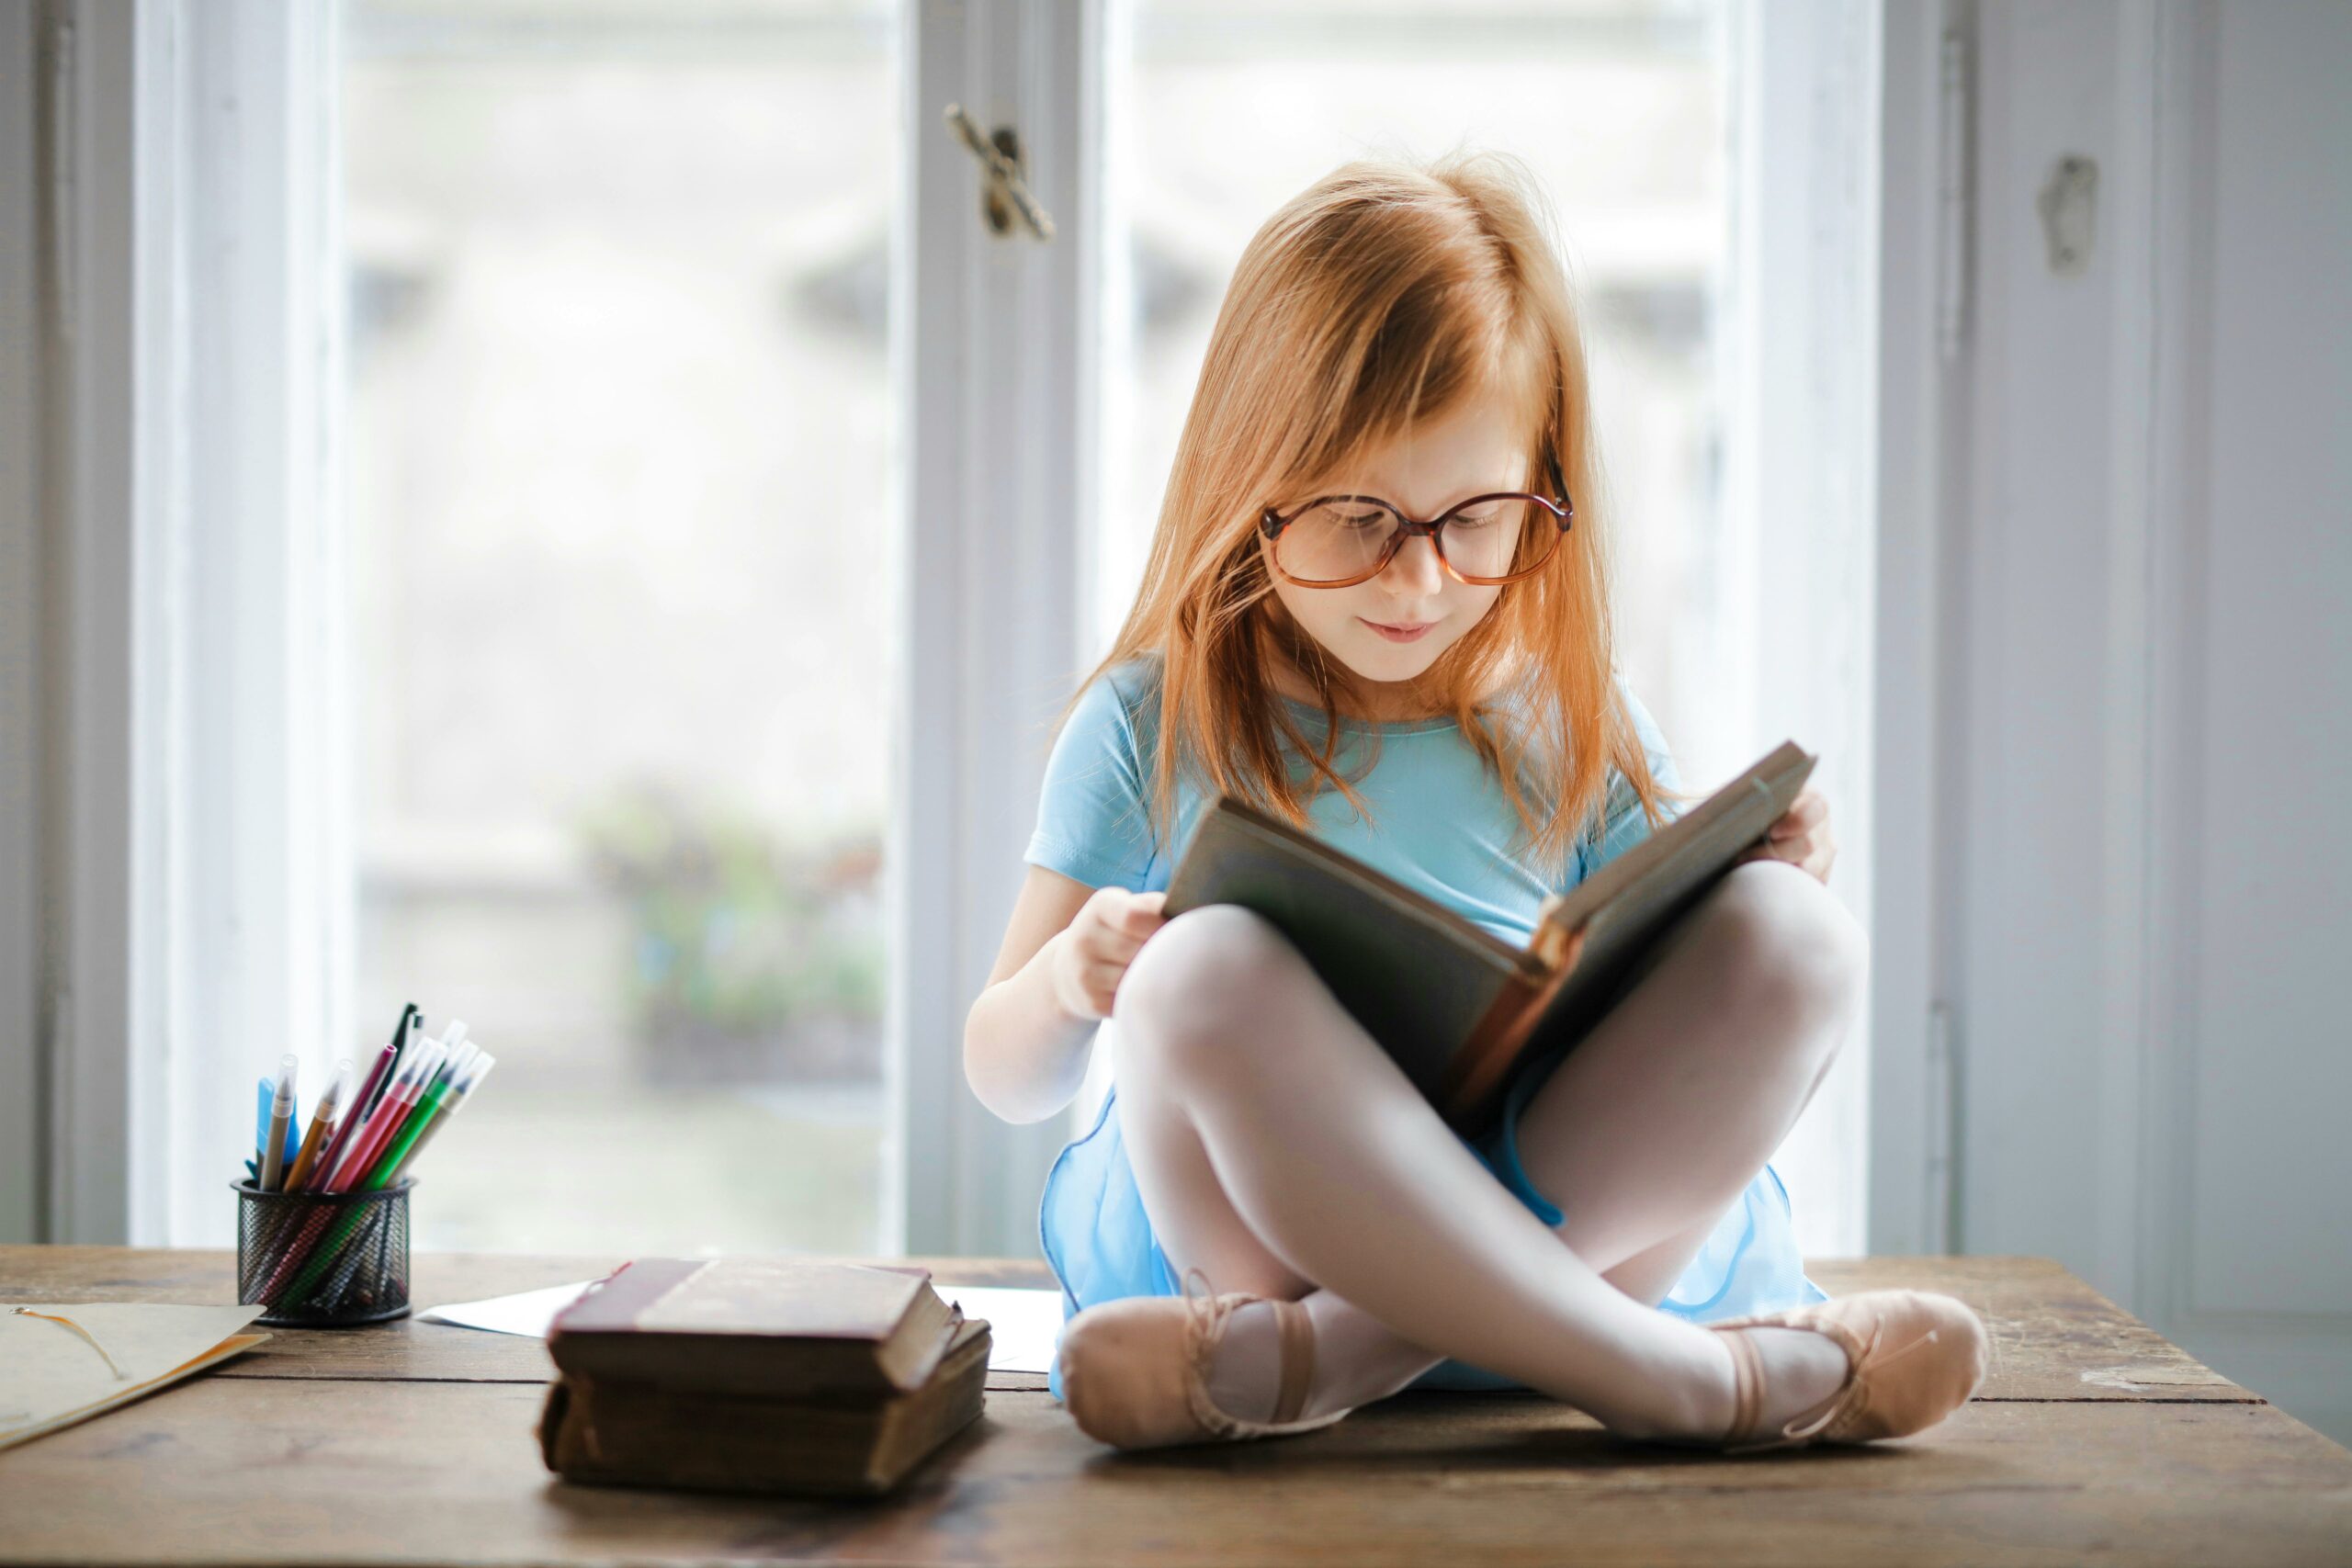 Young girl with red hair and glasses reads book on table.